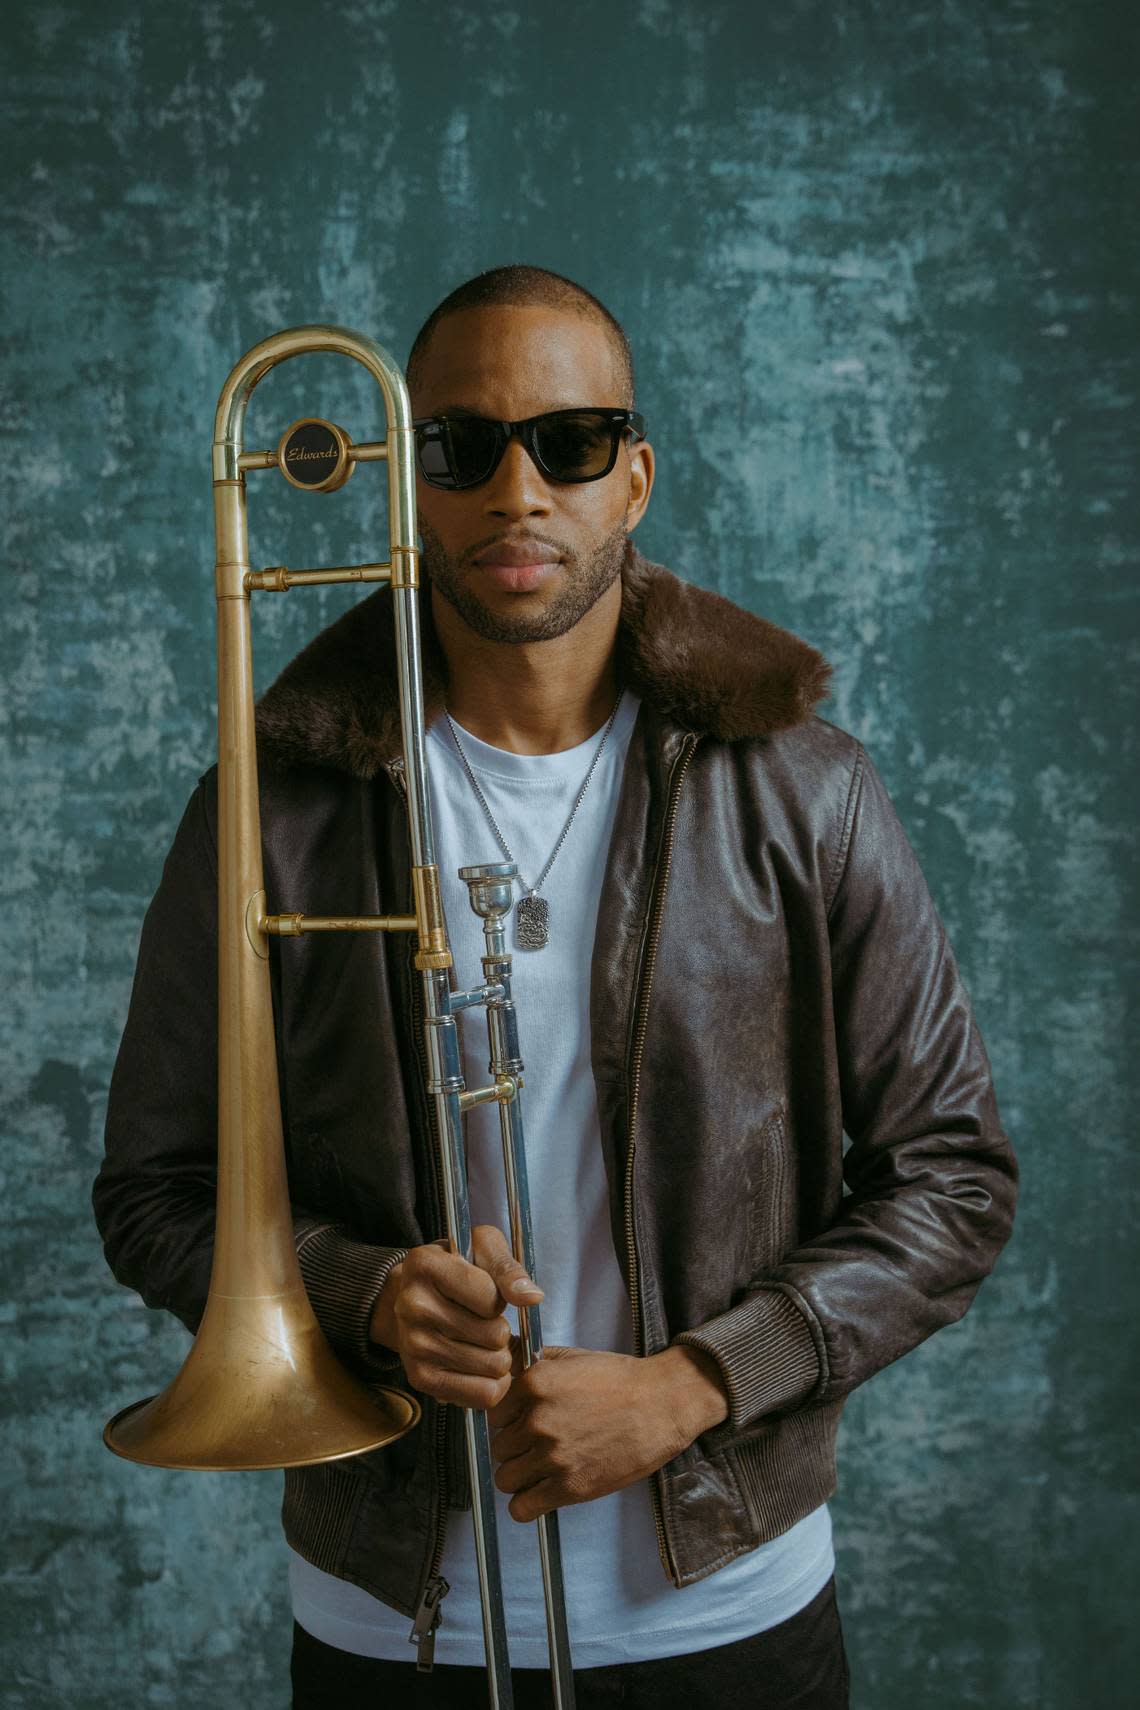 Trombone Shorty will bring his electrifying New Orleans jazz sound to Lexington Opera House.